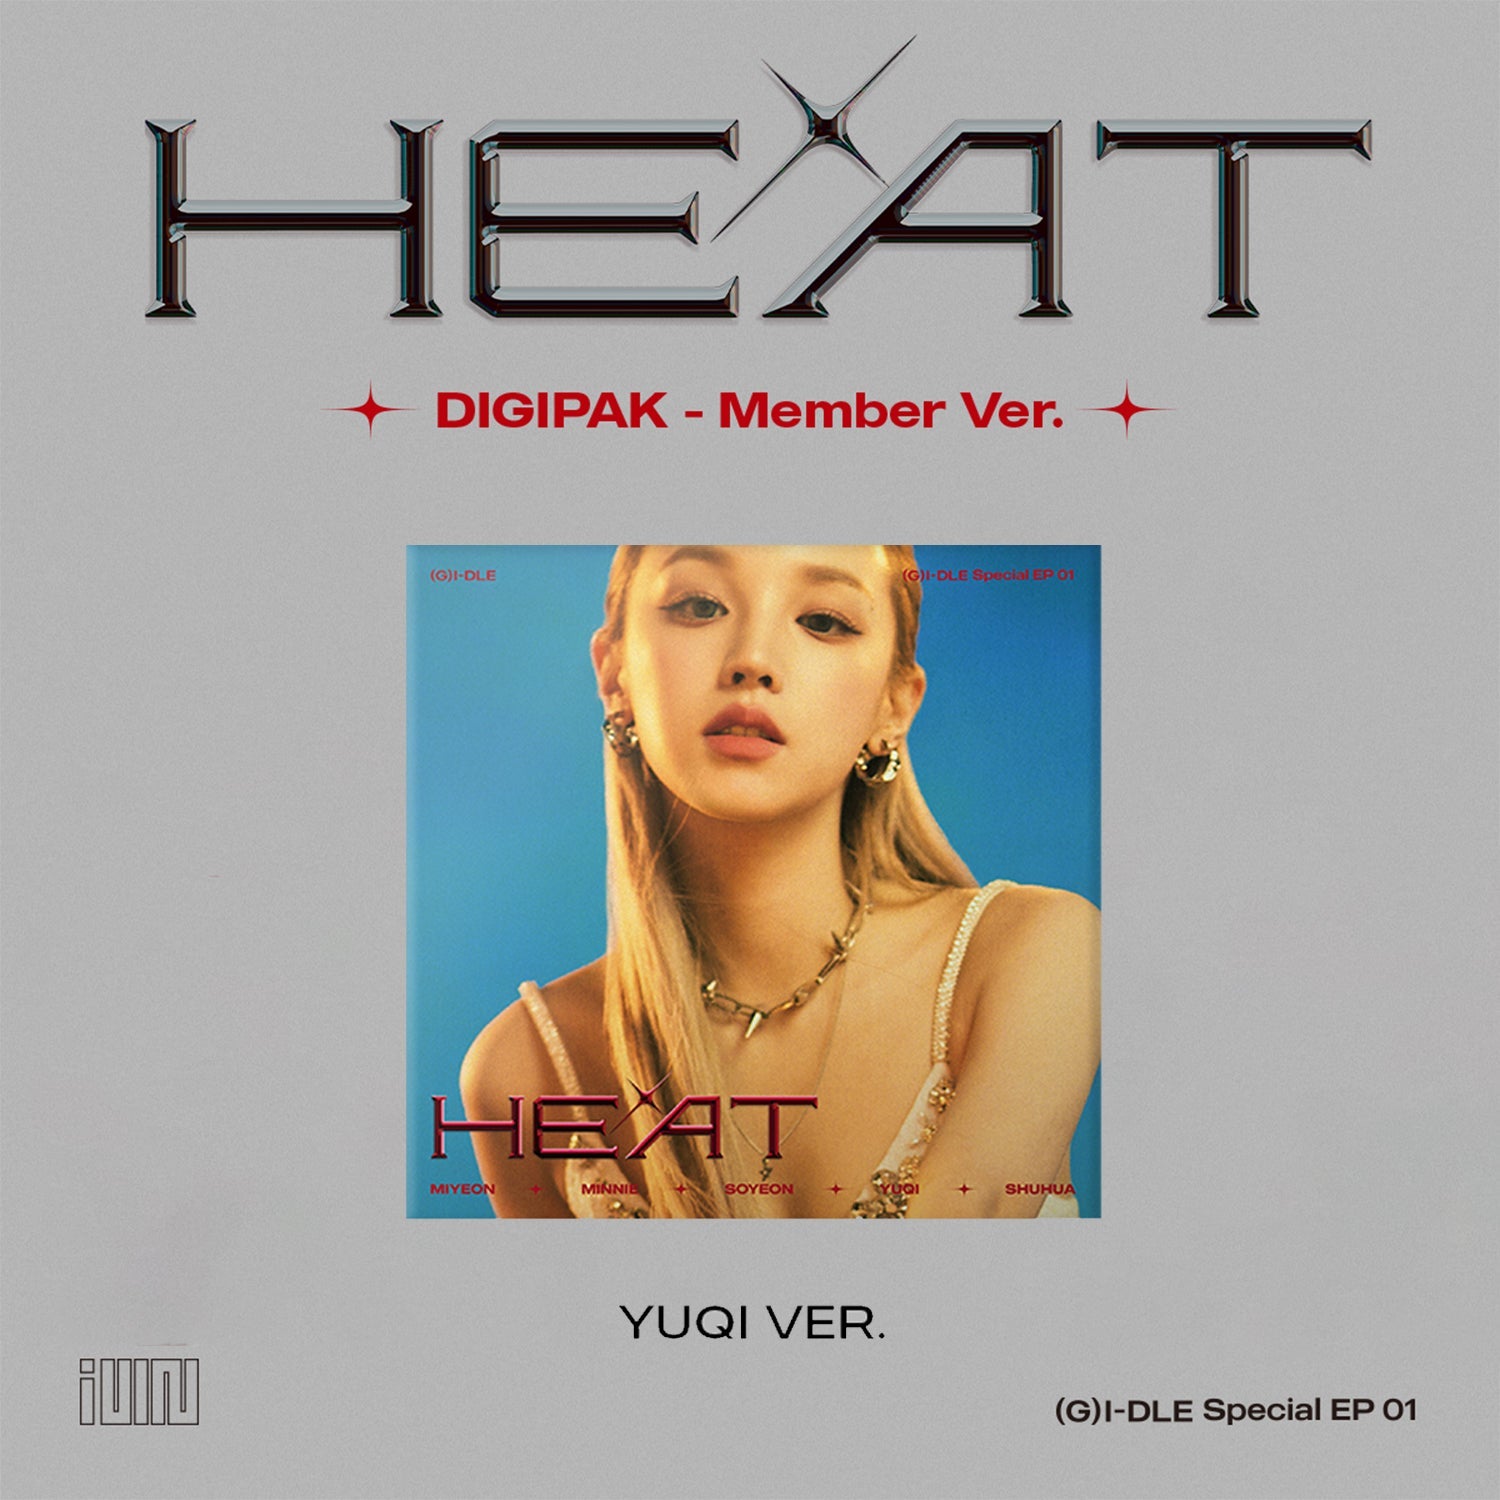 (G)I-DLE SPECIAL ALBUM 'HEAT' (DIGIPACK) YUQI VERSION COVER